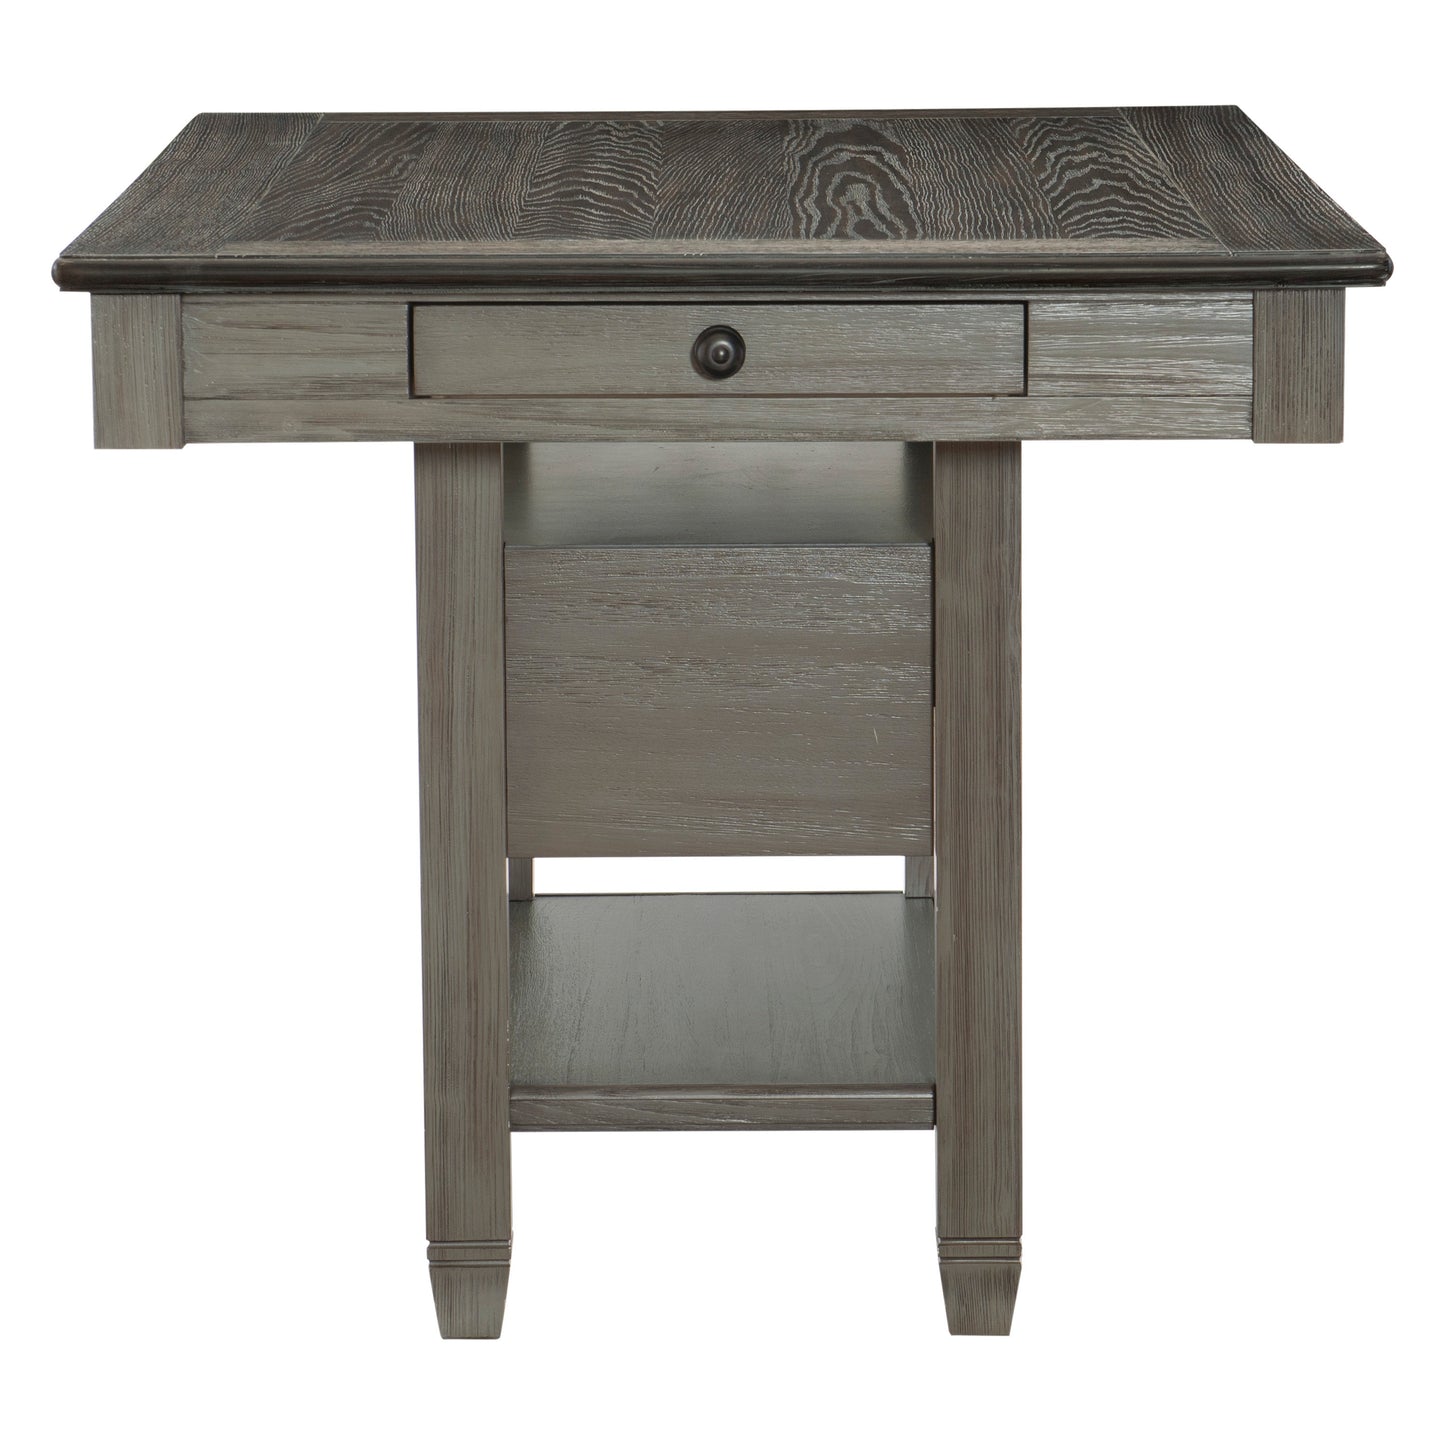 60" Wide Counter Height Table - Antique Grey - Antique Grey